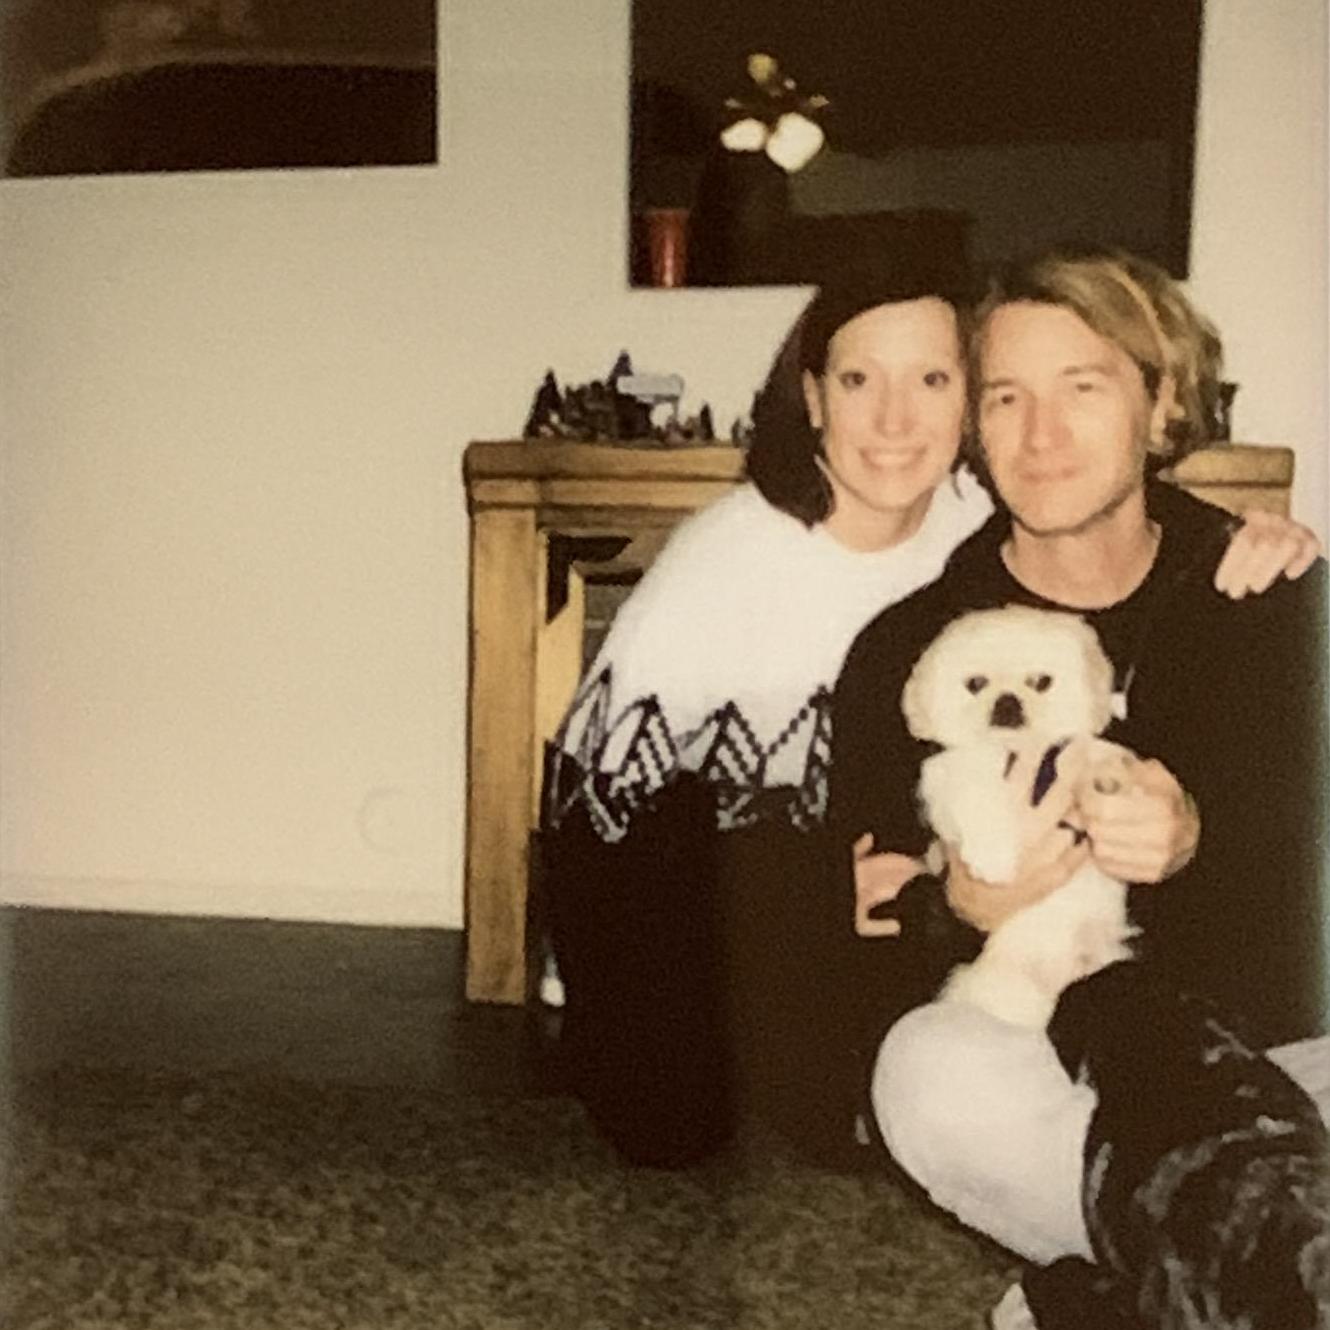 This photo cracks me up... so unprepared, new puppy wiggling, niece snapping instant photo. We look so weird!